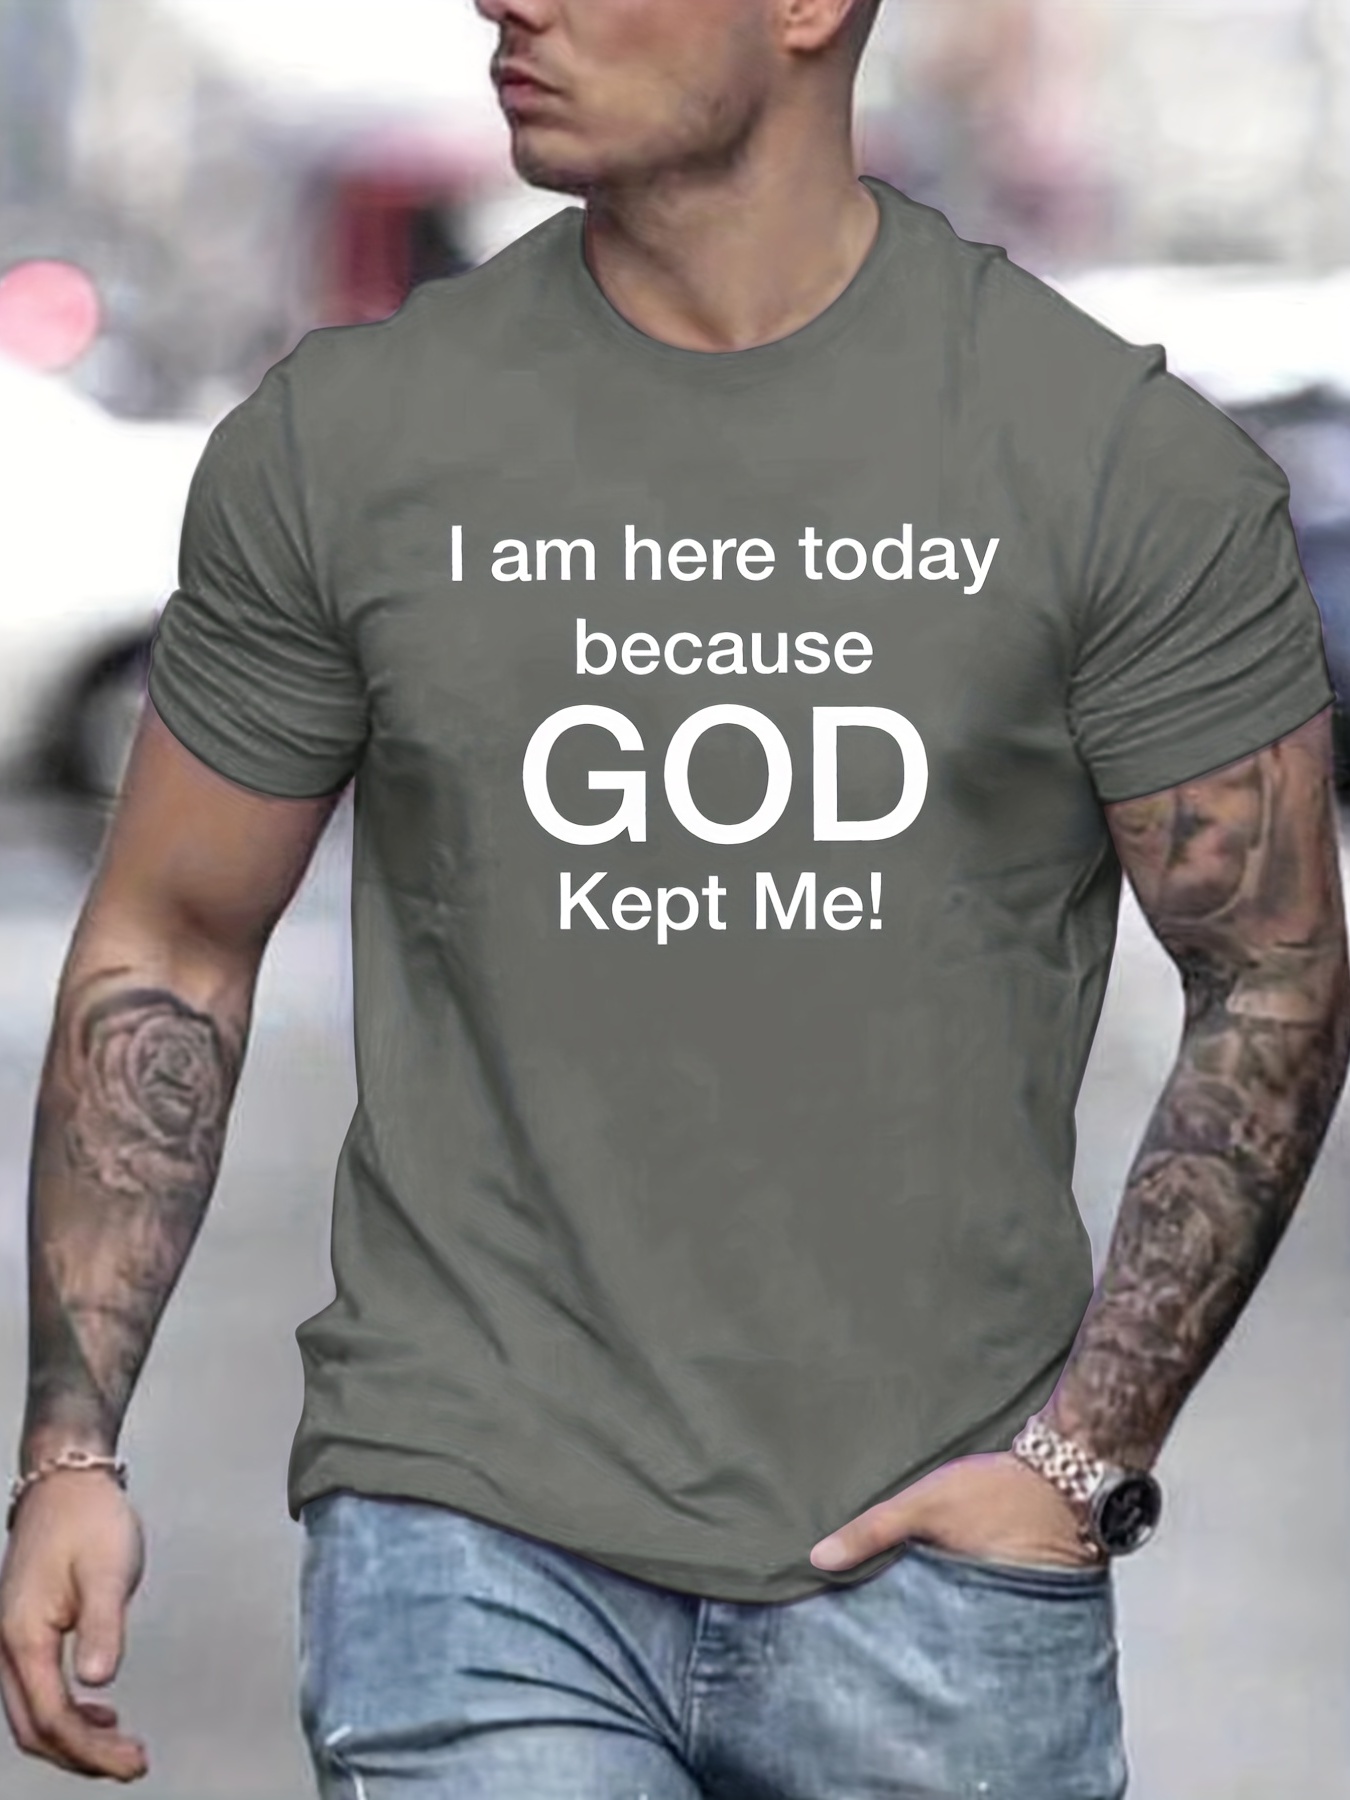 tees for men god kept me print t shirt casual short sleeve tshirt for summer spring fall tops as gifts details 0